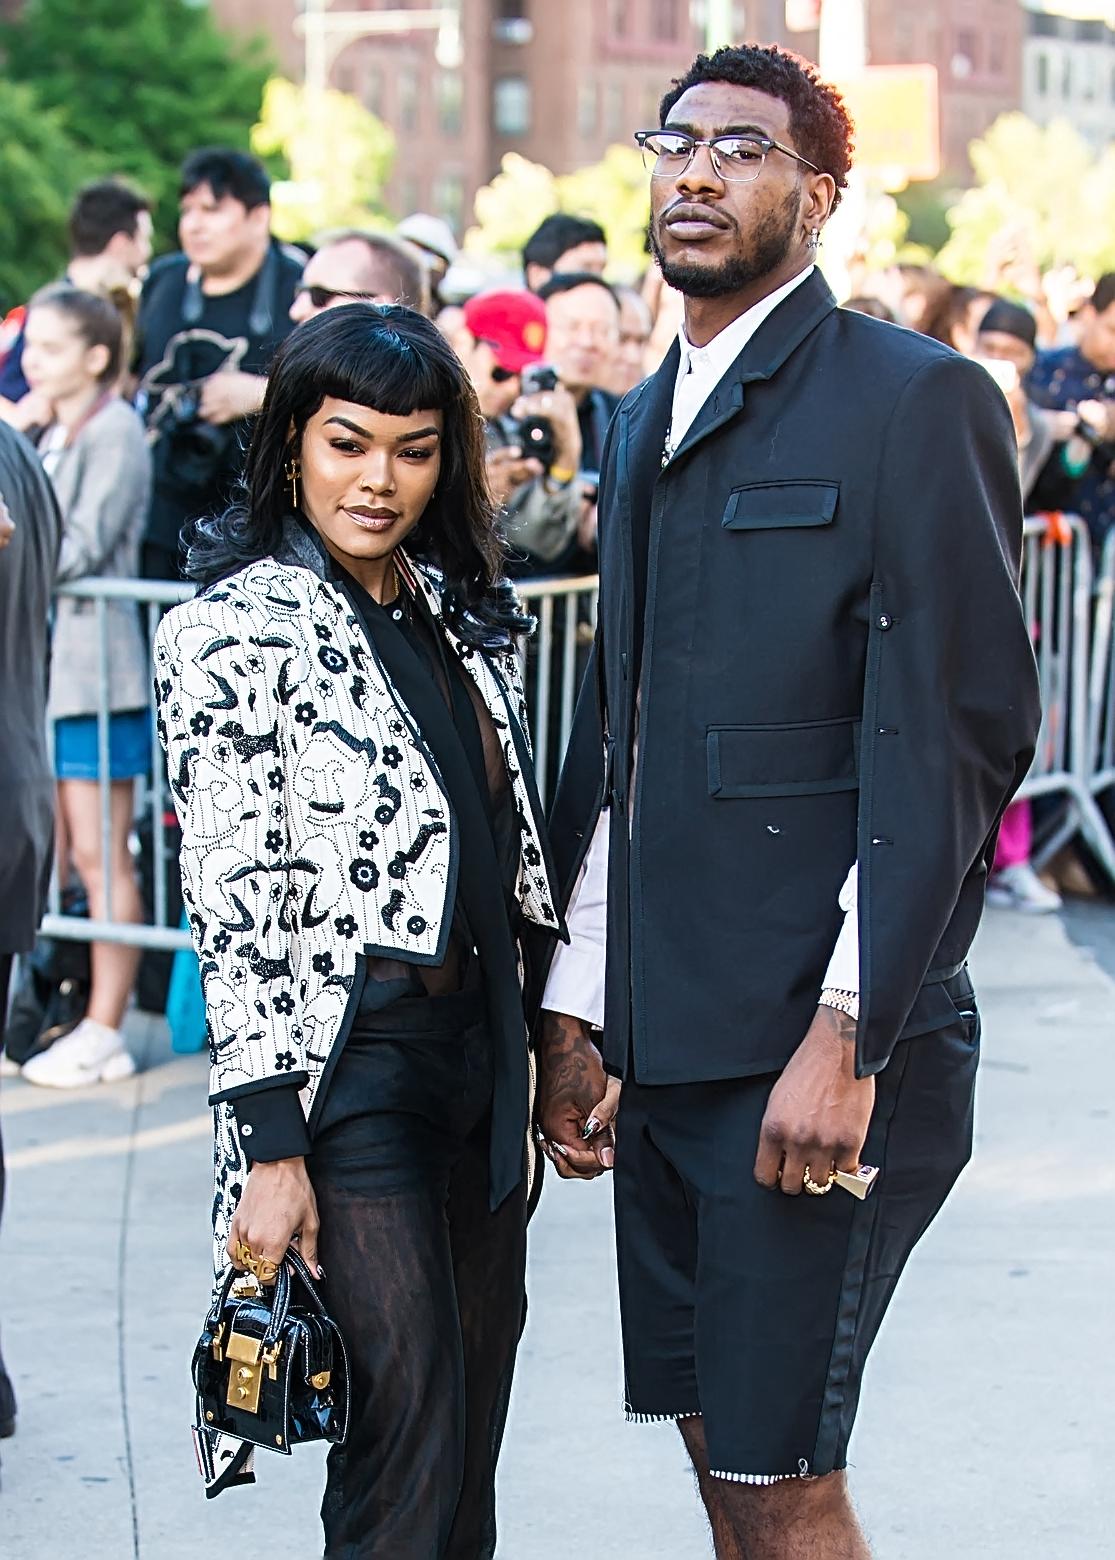 Teyana Taylor Confirms Her Marriage To Iman Shumpert Is OVER After Cheating Rumors